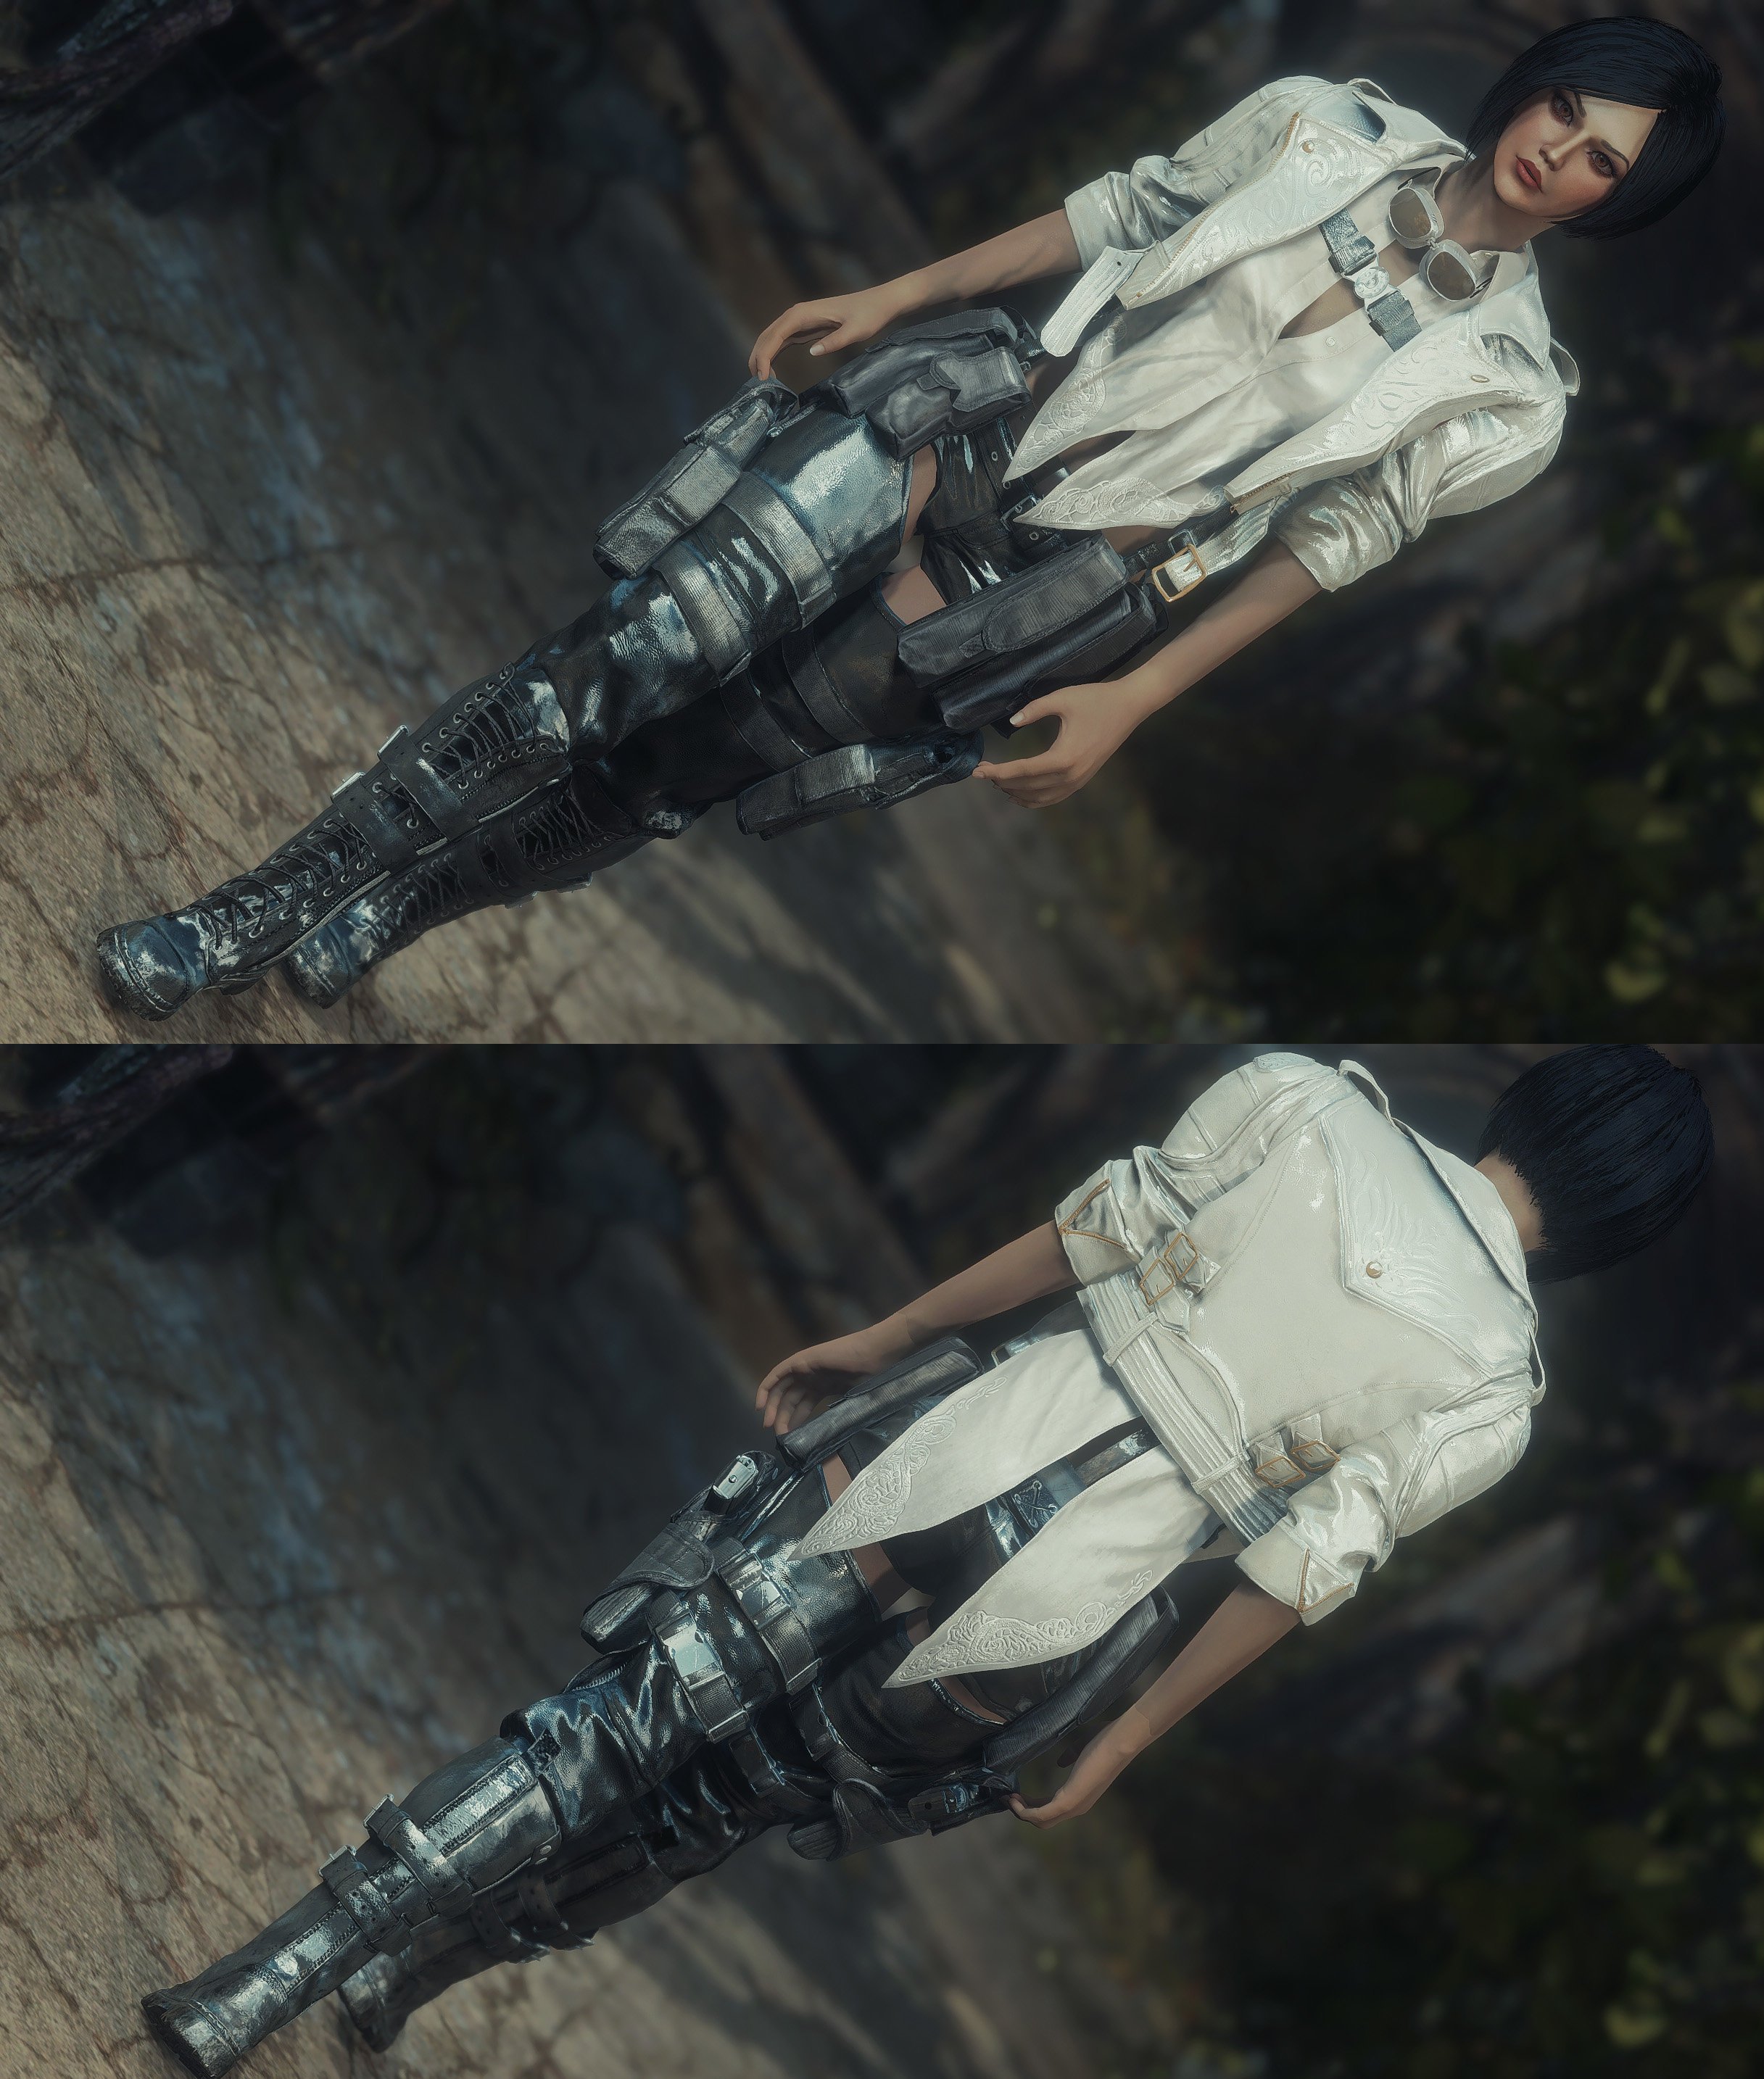 Vtaw workshop fallout 4 clothing armor mods фото 38